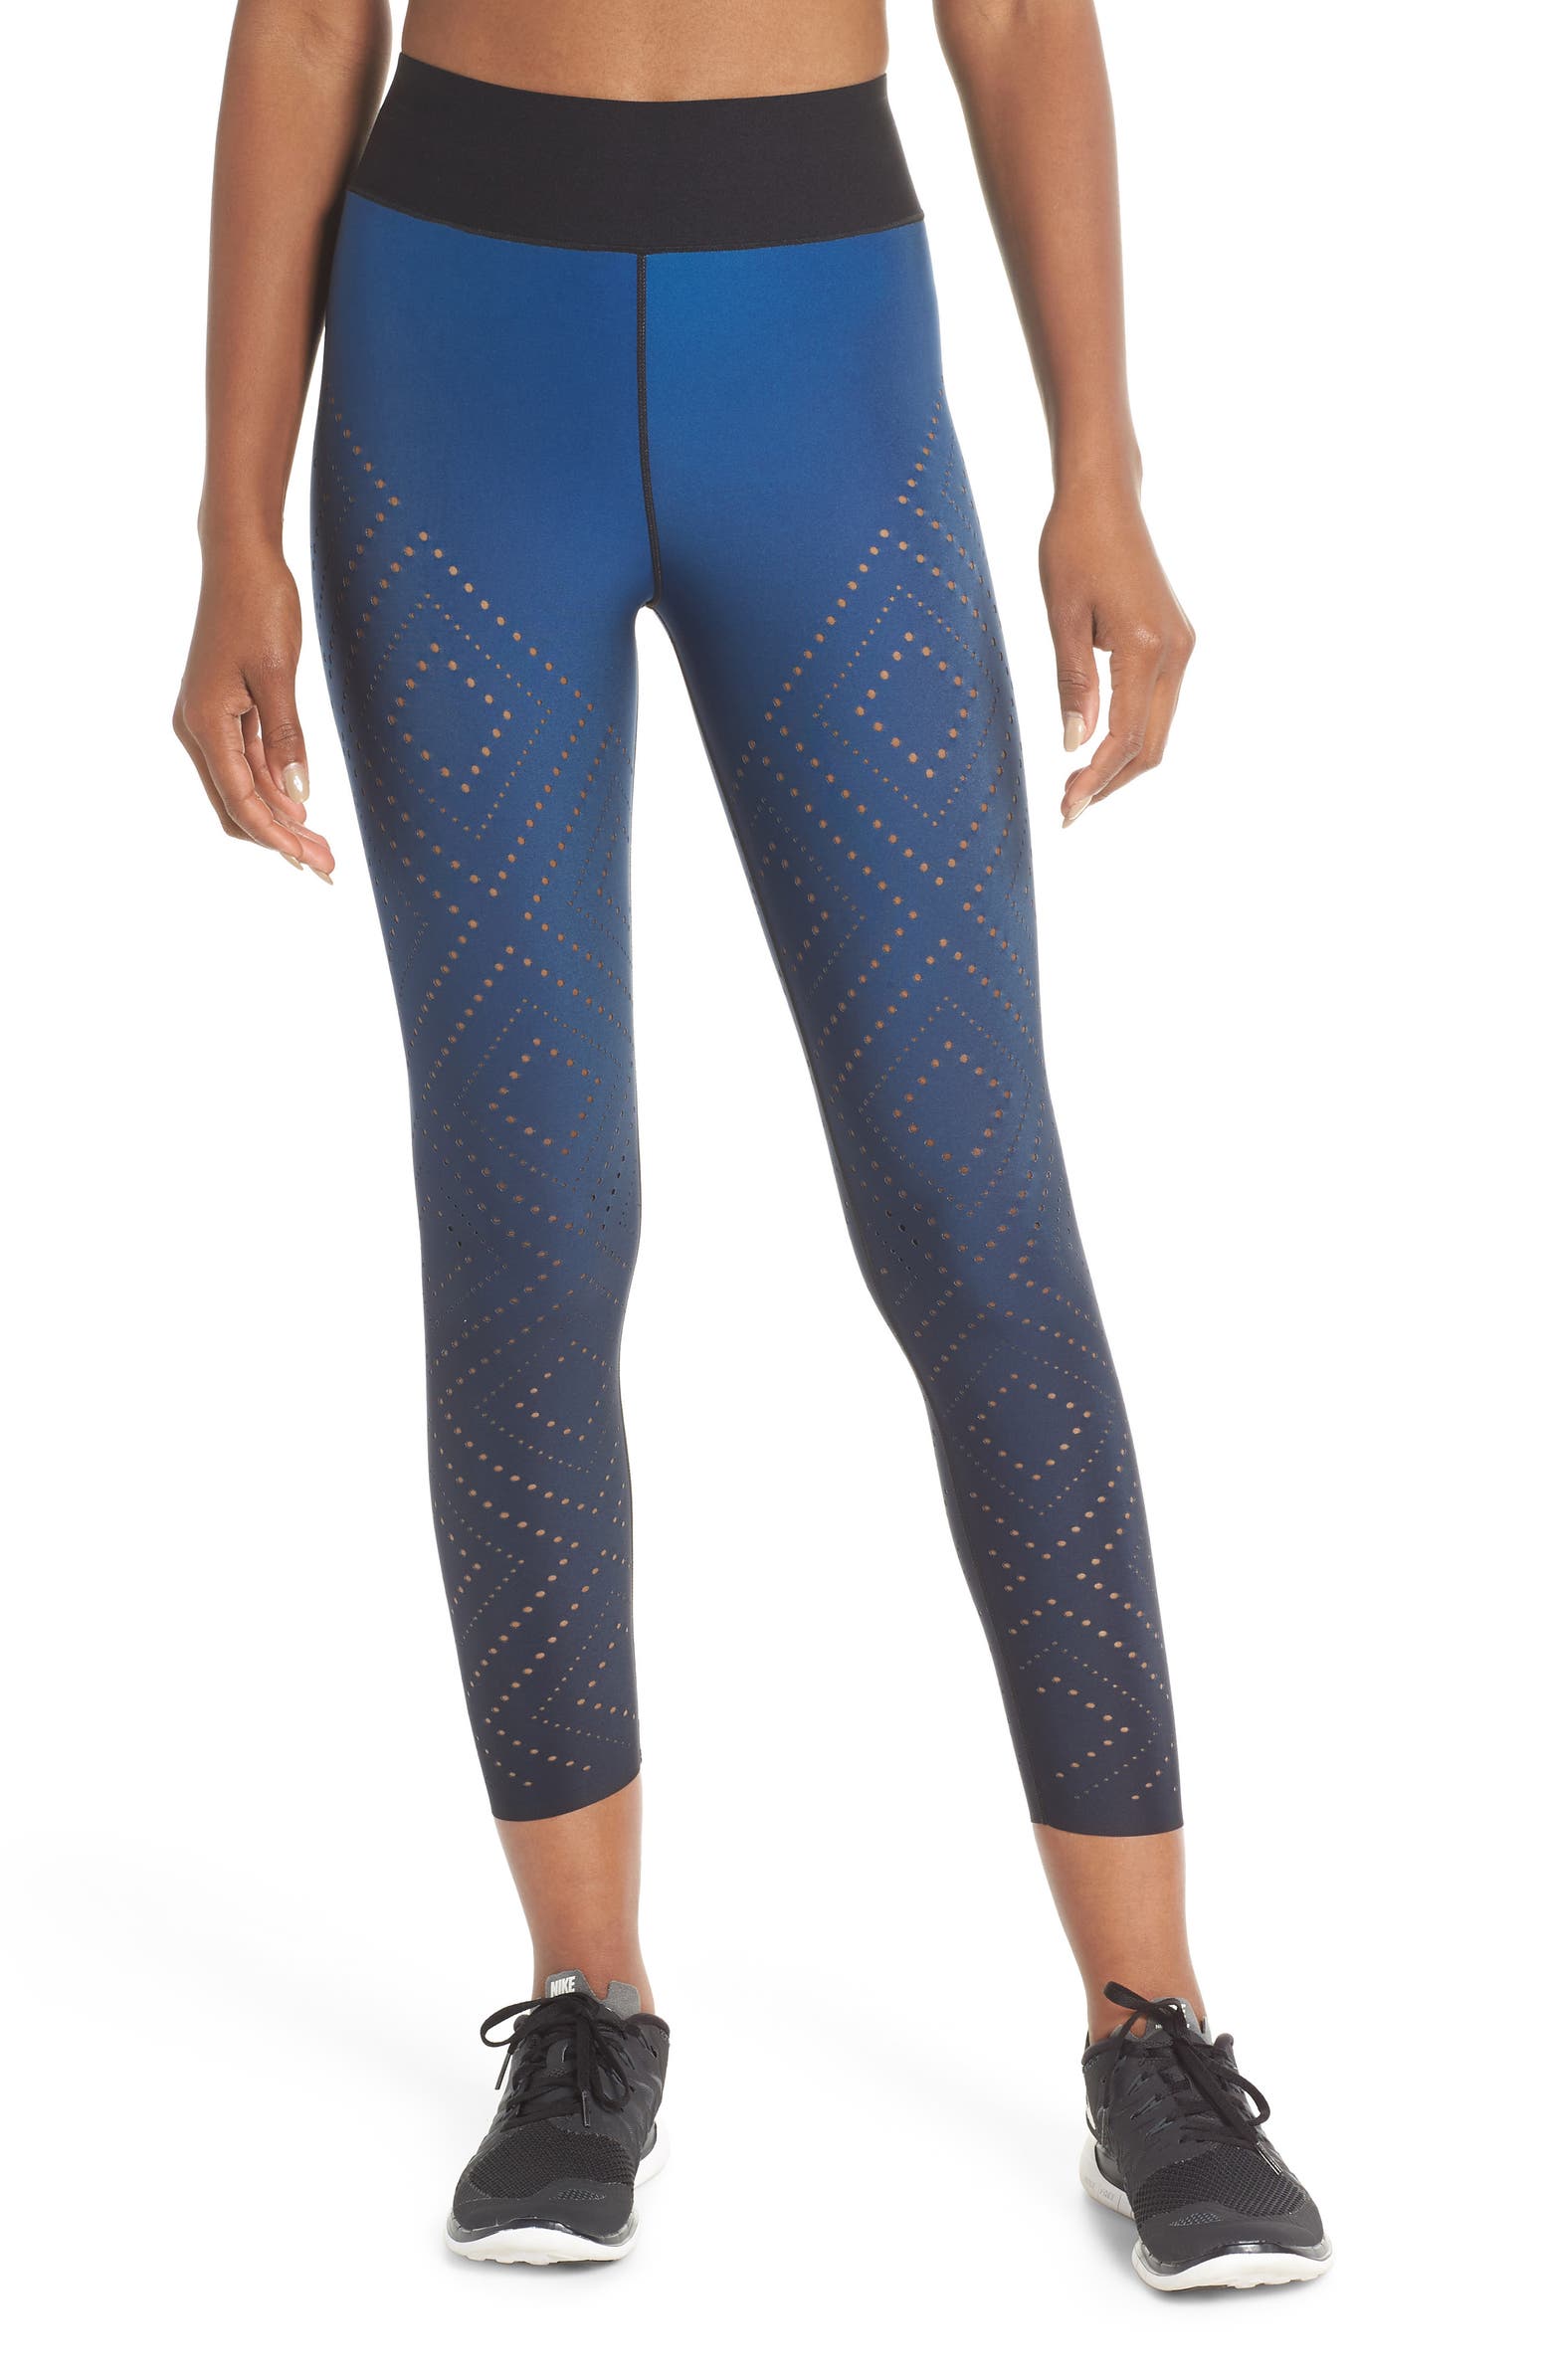 I Hate How Much I Love Ultracor's $198 Workout Leggings